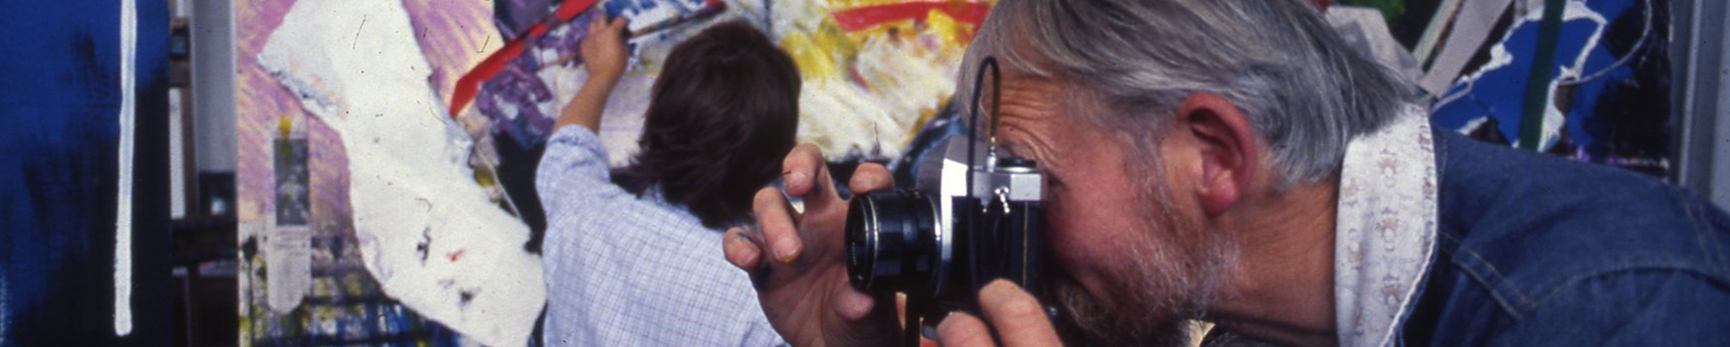 Man with grey hair taking a photo on a black film camera in front of a person painting on a large colourful surface in the background